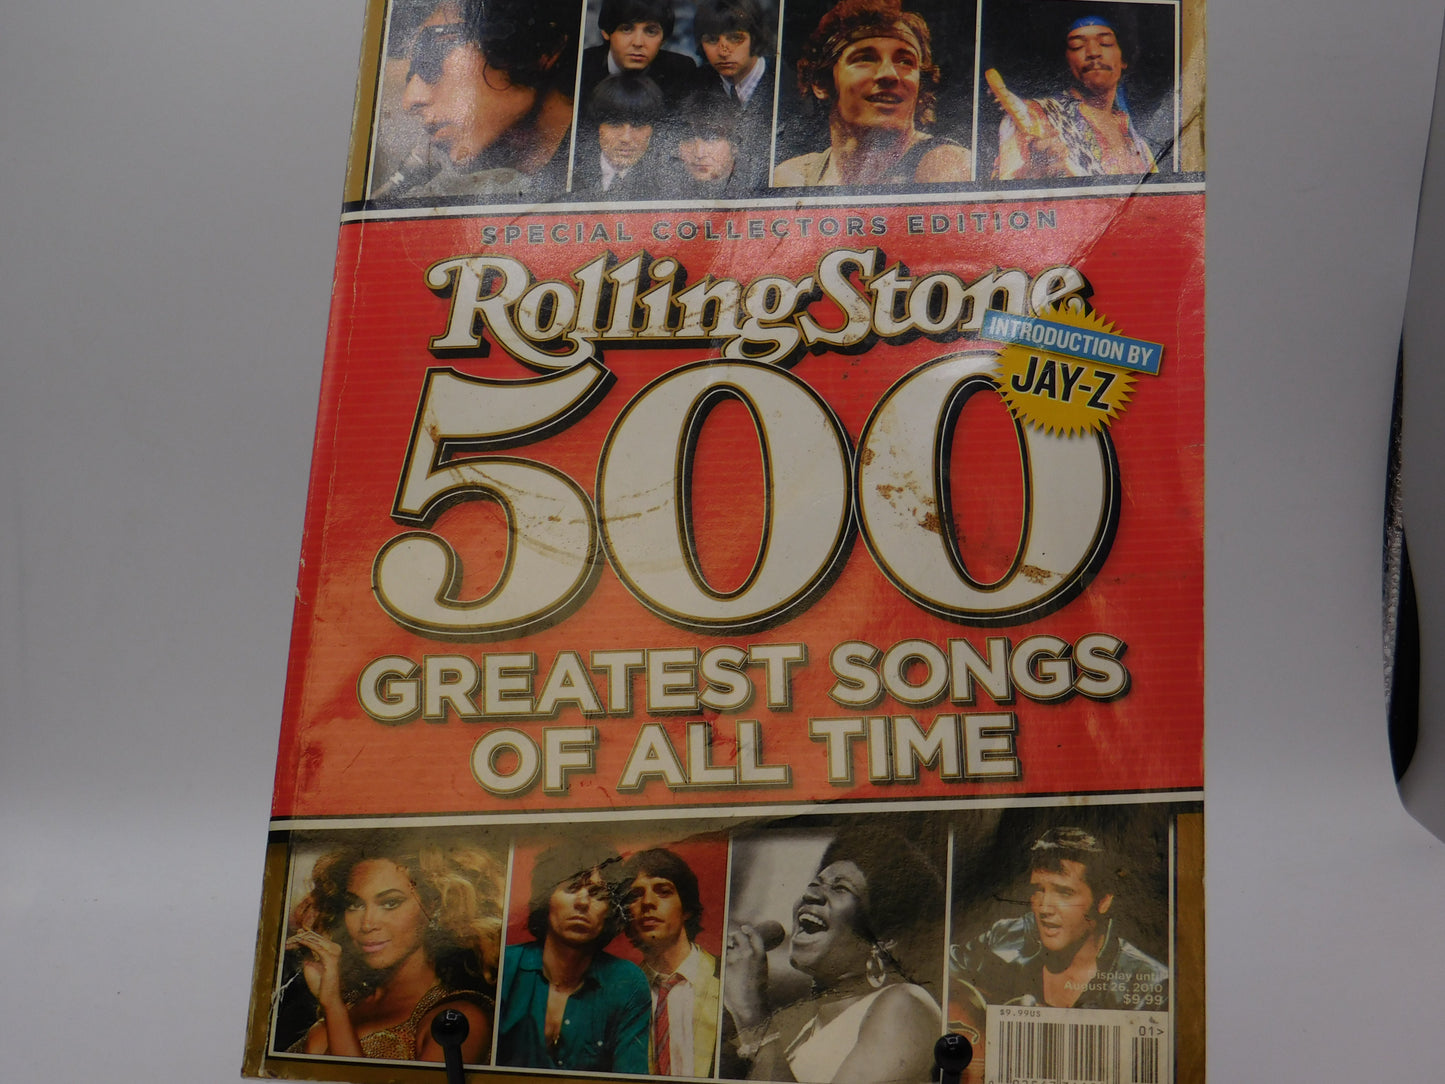 Special Collector's Edition 500 Greatest Songs of All Time by Rolling Stone